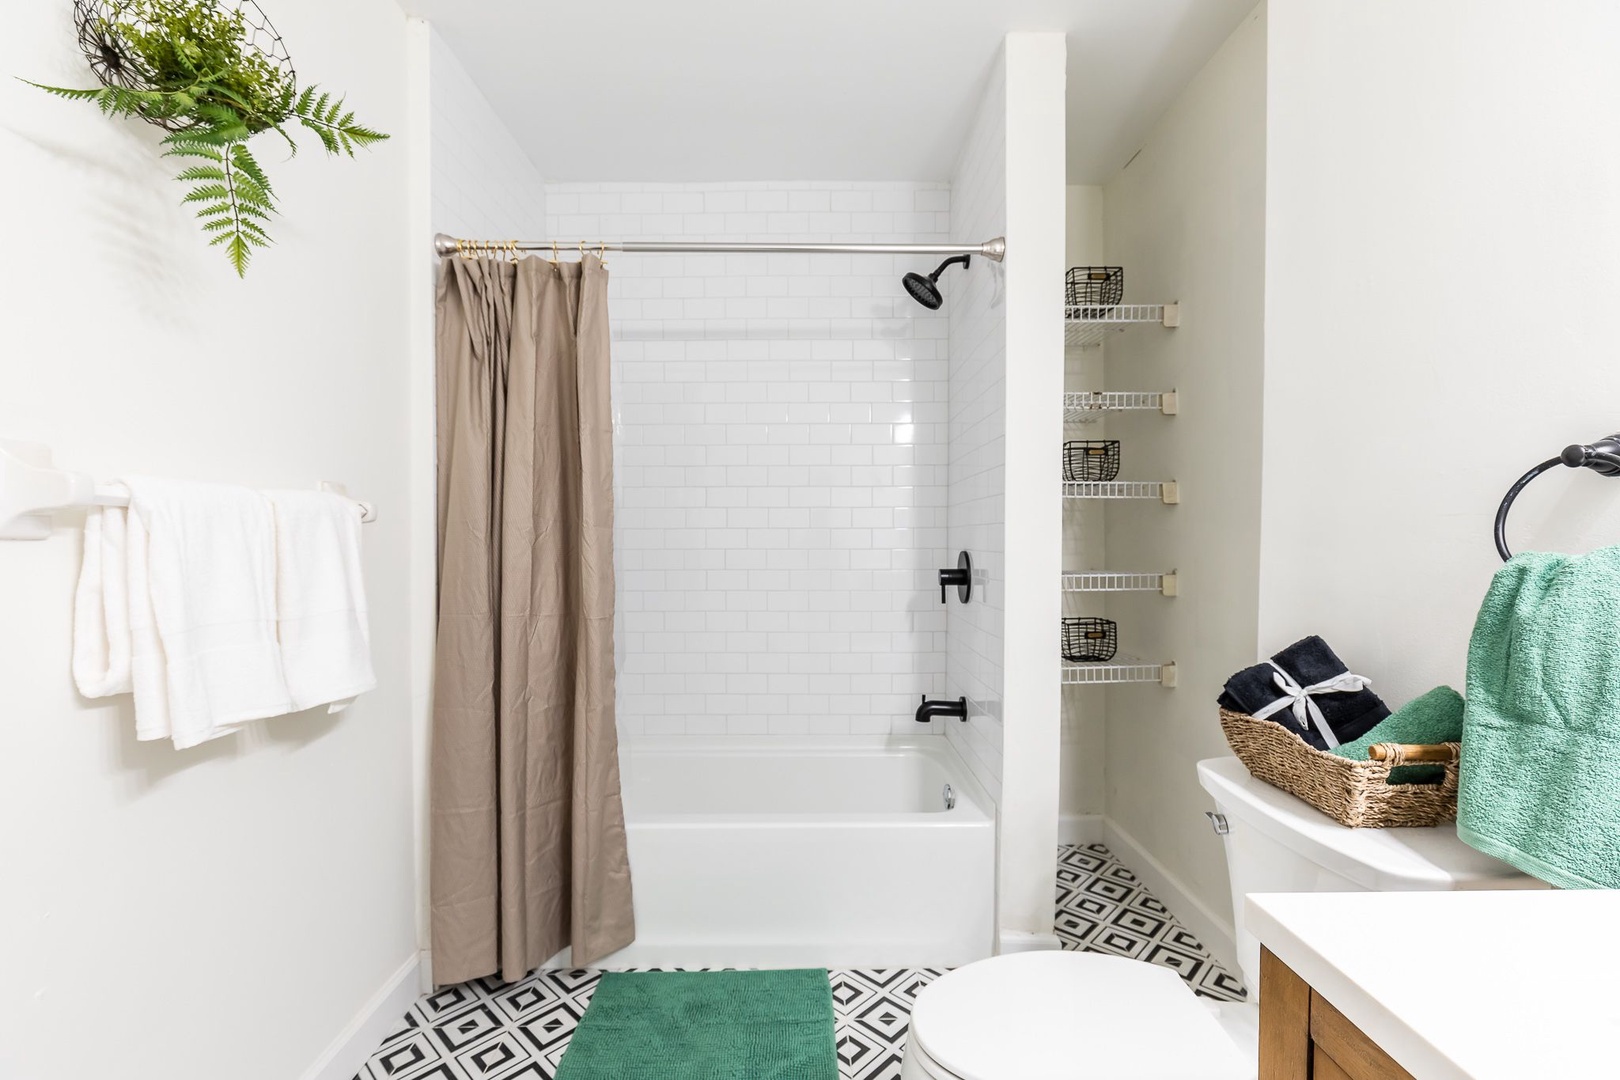 Apt 1 – The full bathroom includes a double vanity & shower/tub combo